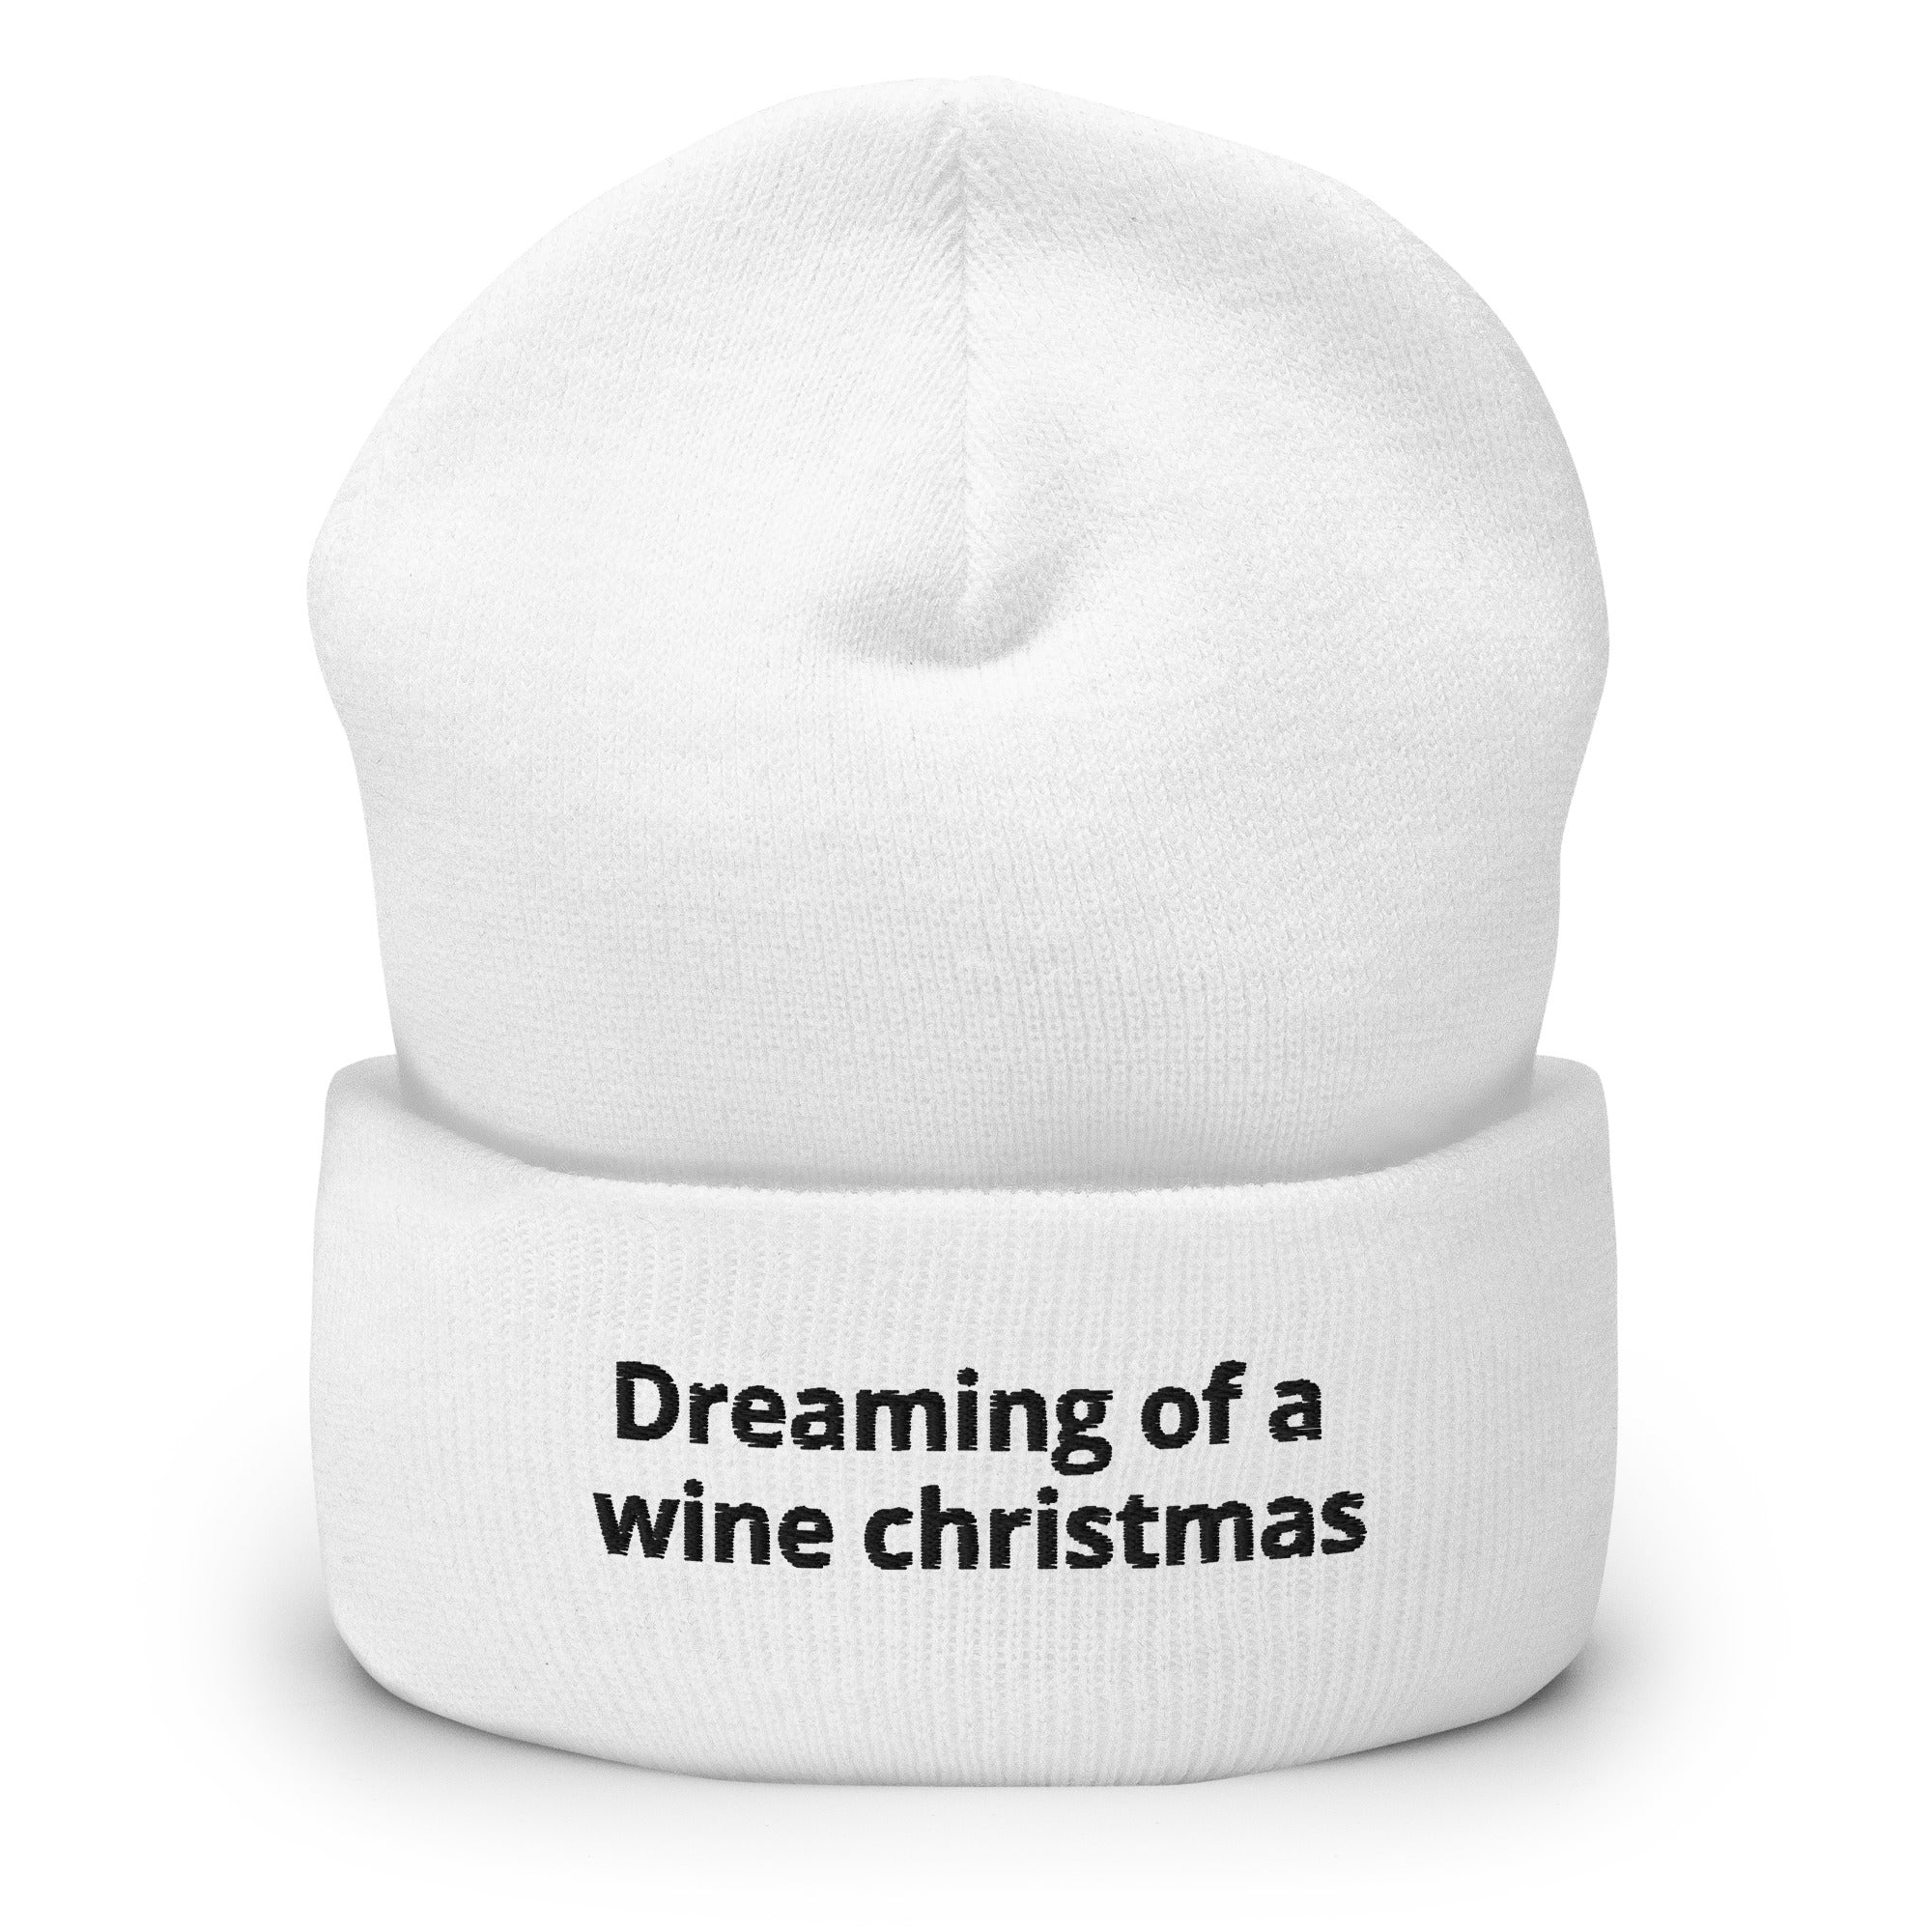 DREAMING OF A WINE CHRISTMAS